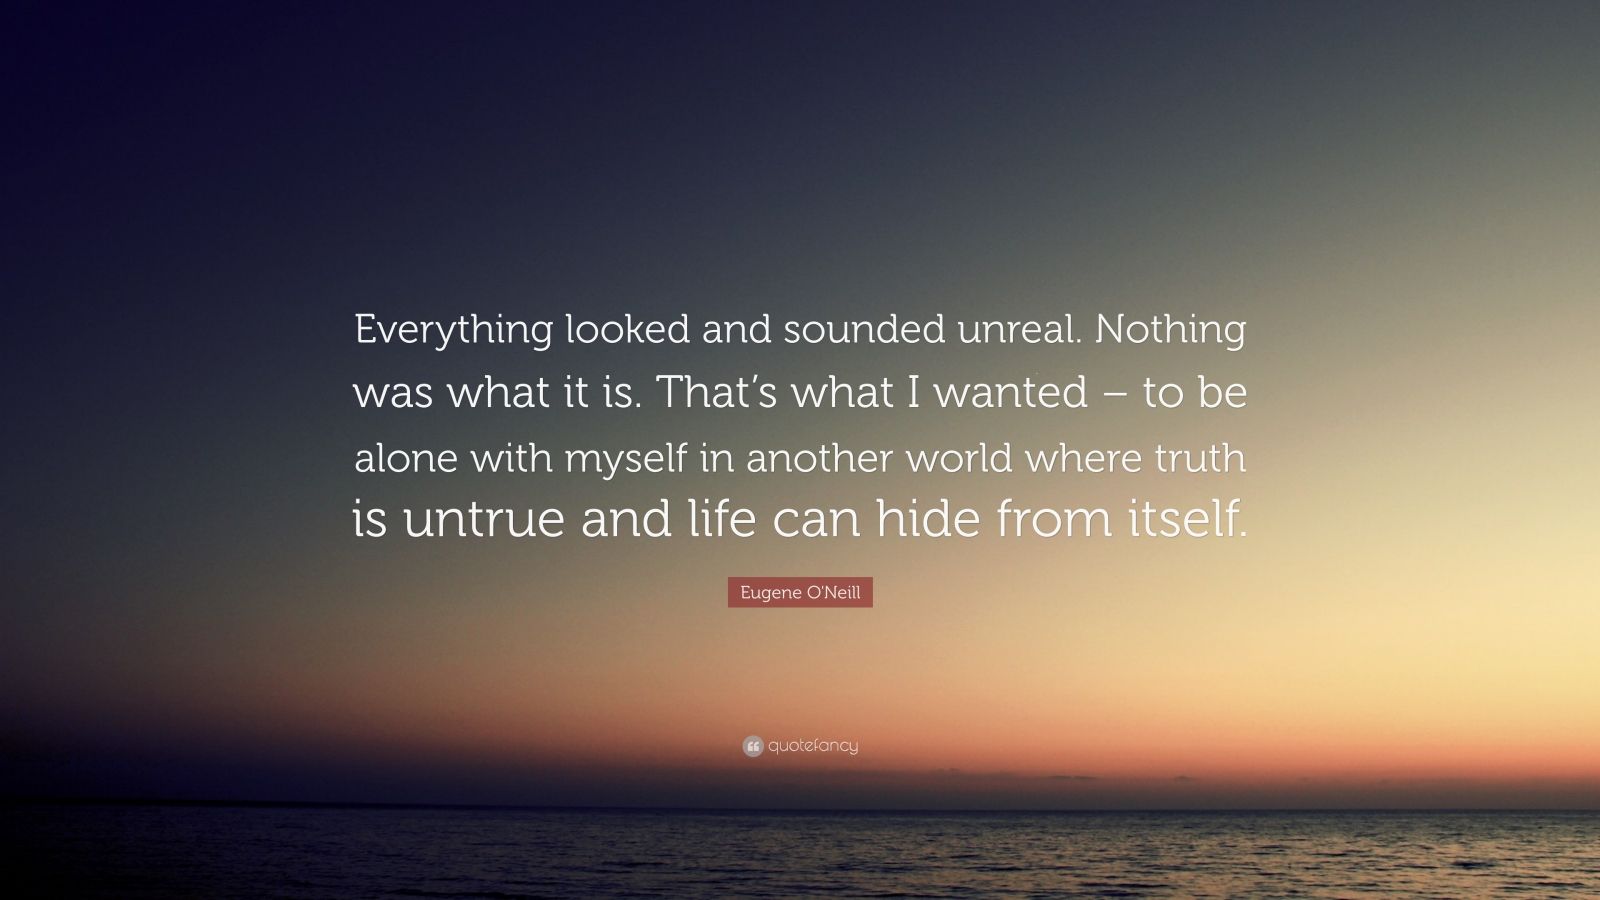 Eugene O'Neill Quote: “Everything looked and sounded unreal. Nothing ...